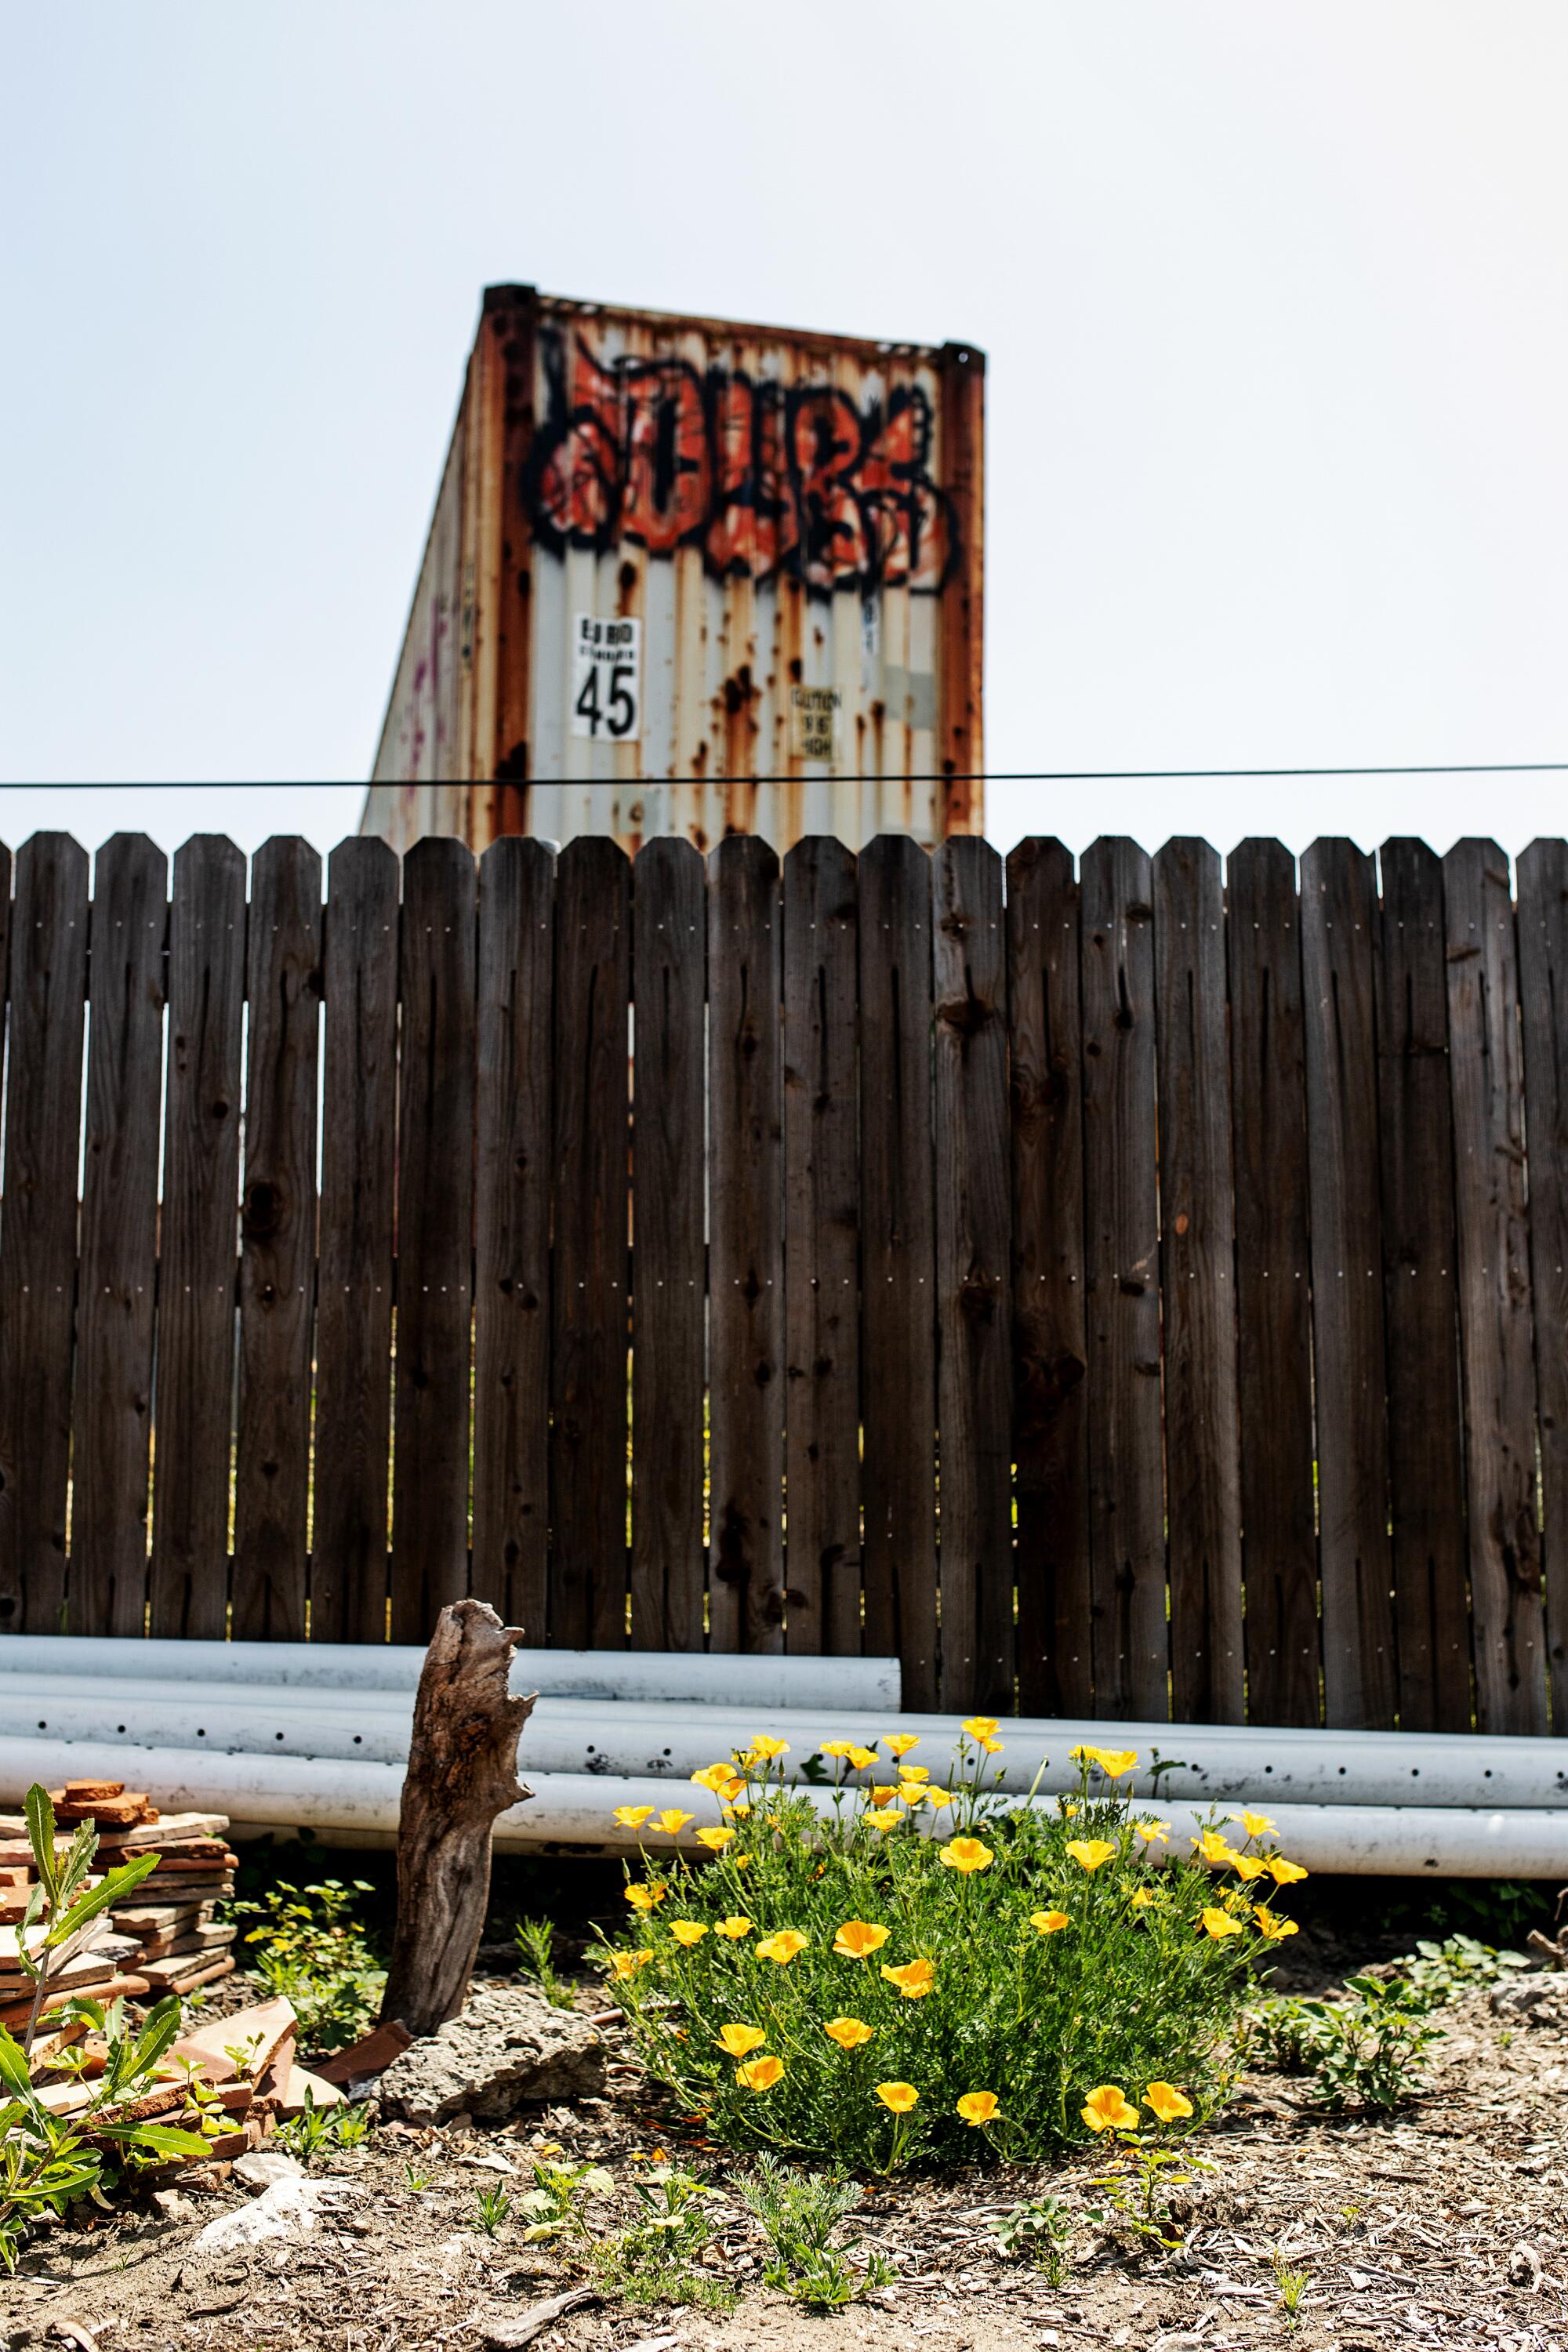 Flowers bloom inside the fenced walls of a garden, as old rusted storage containers rise up from the adjacent yard.